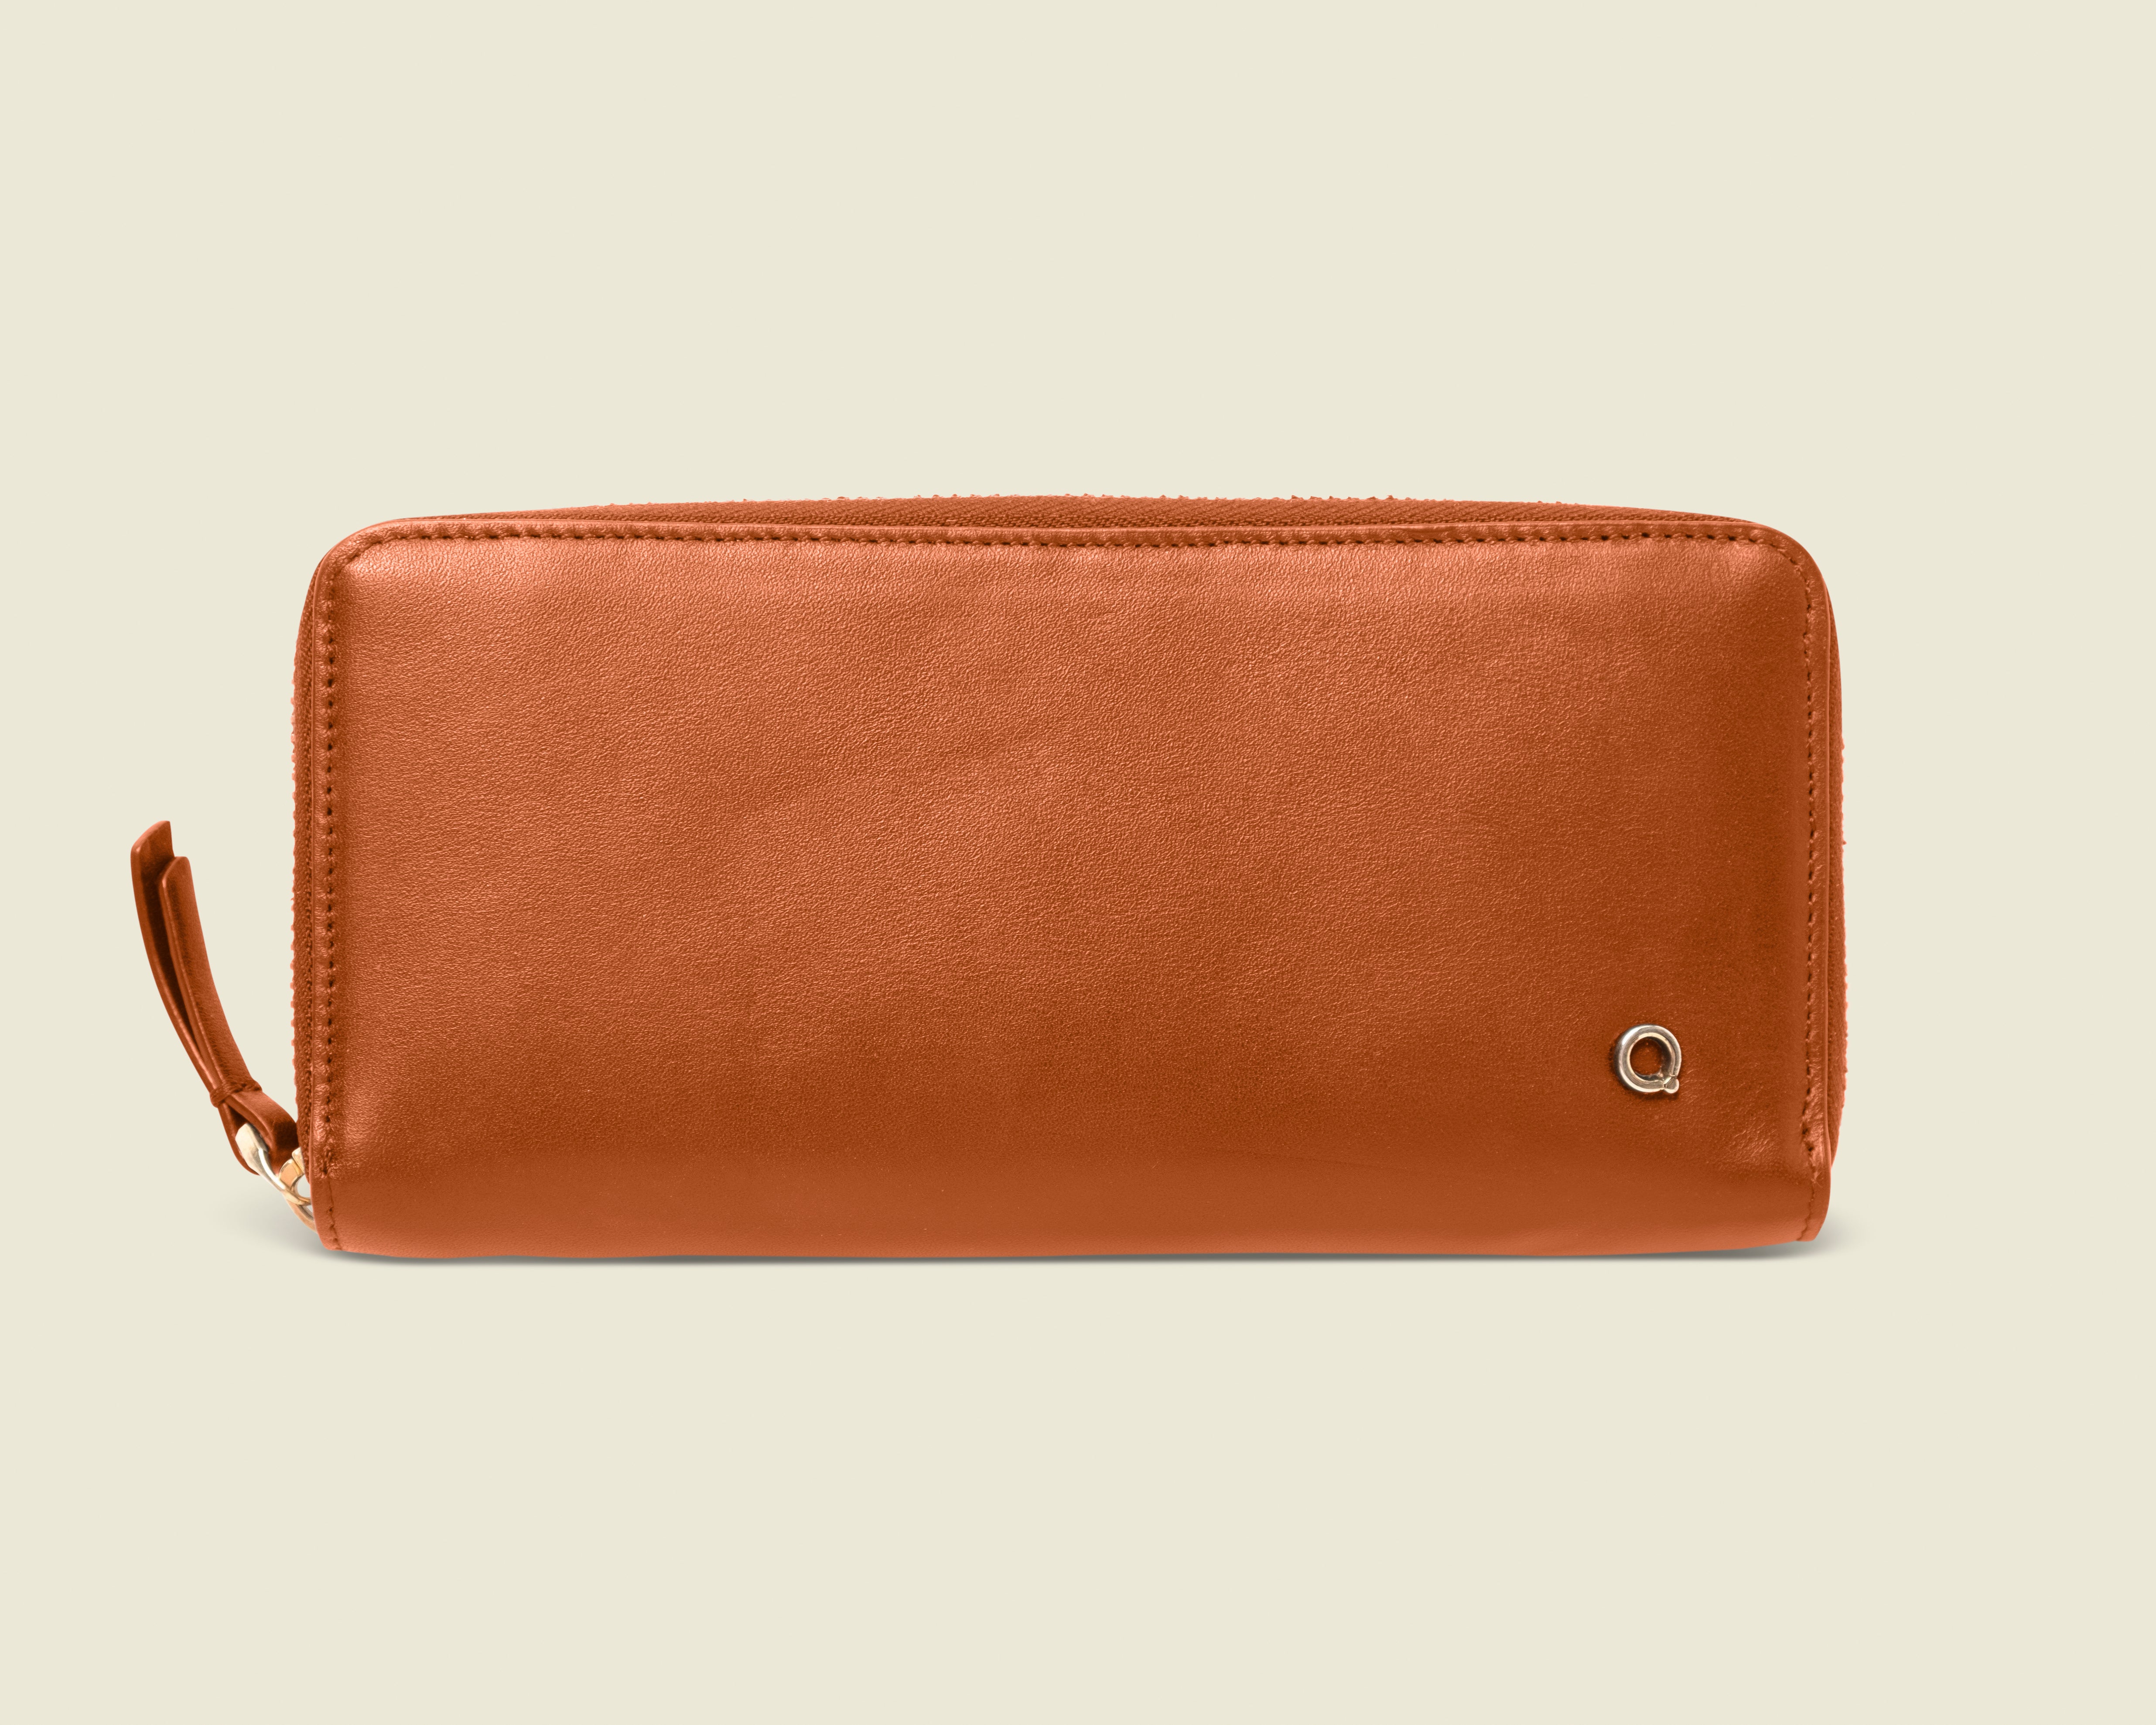 Tan long leather wallet for women - corporate gifts and private label